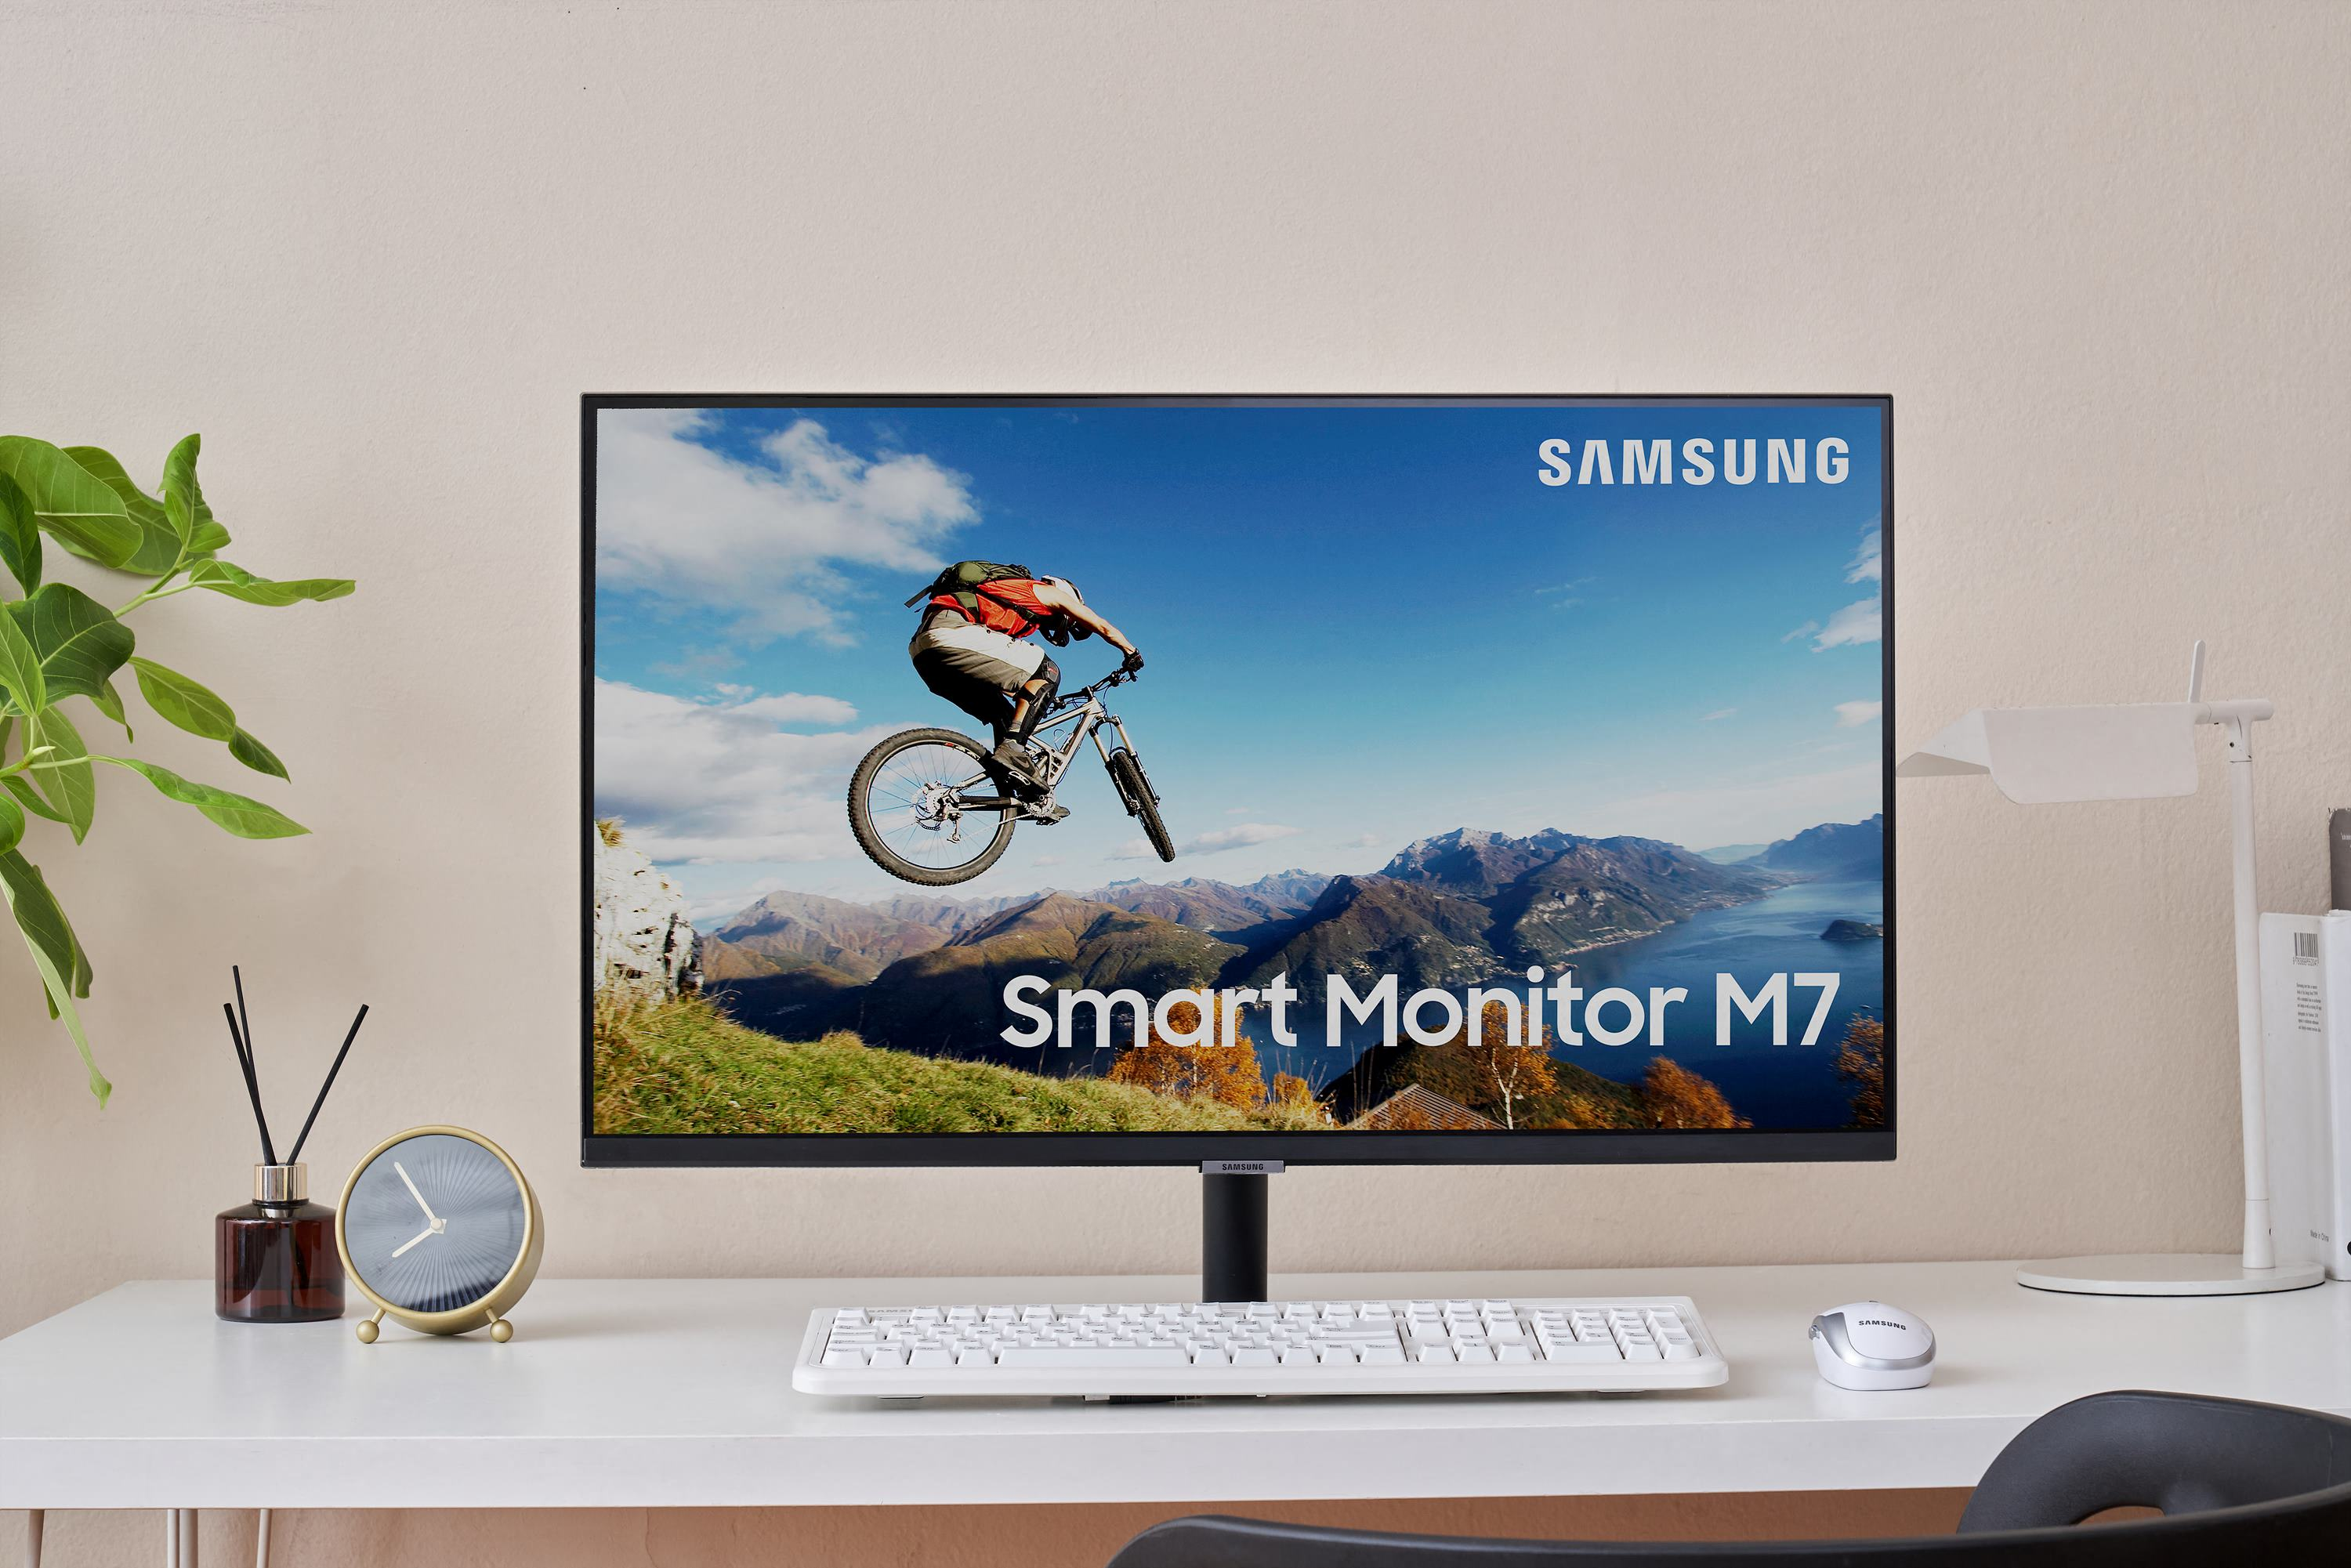 Samsung Monitor | WINPROMY CONSULTANCY SDN BHD. (1065242-V) All Rights Reserved.